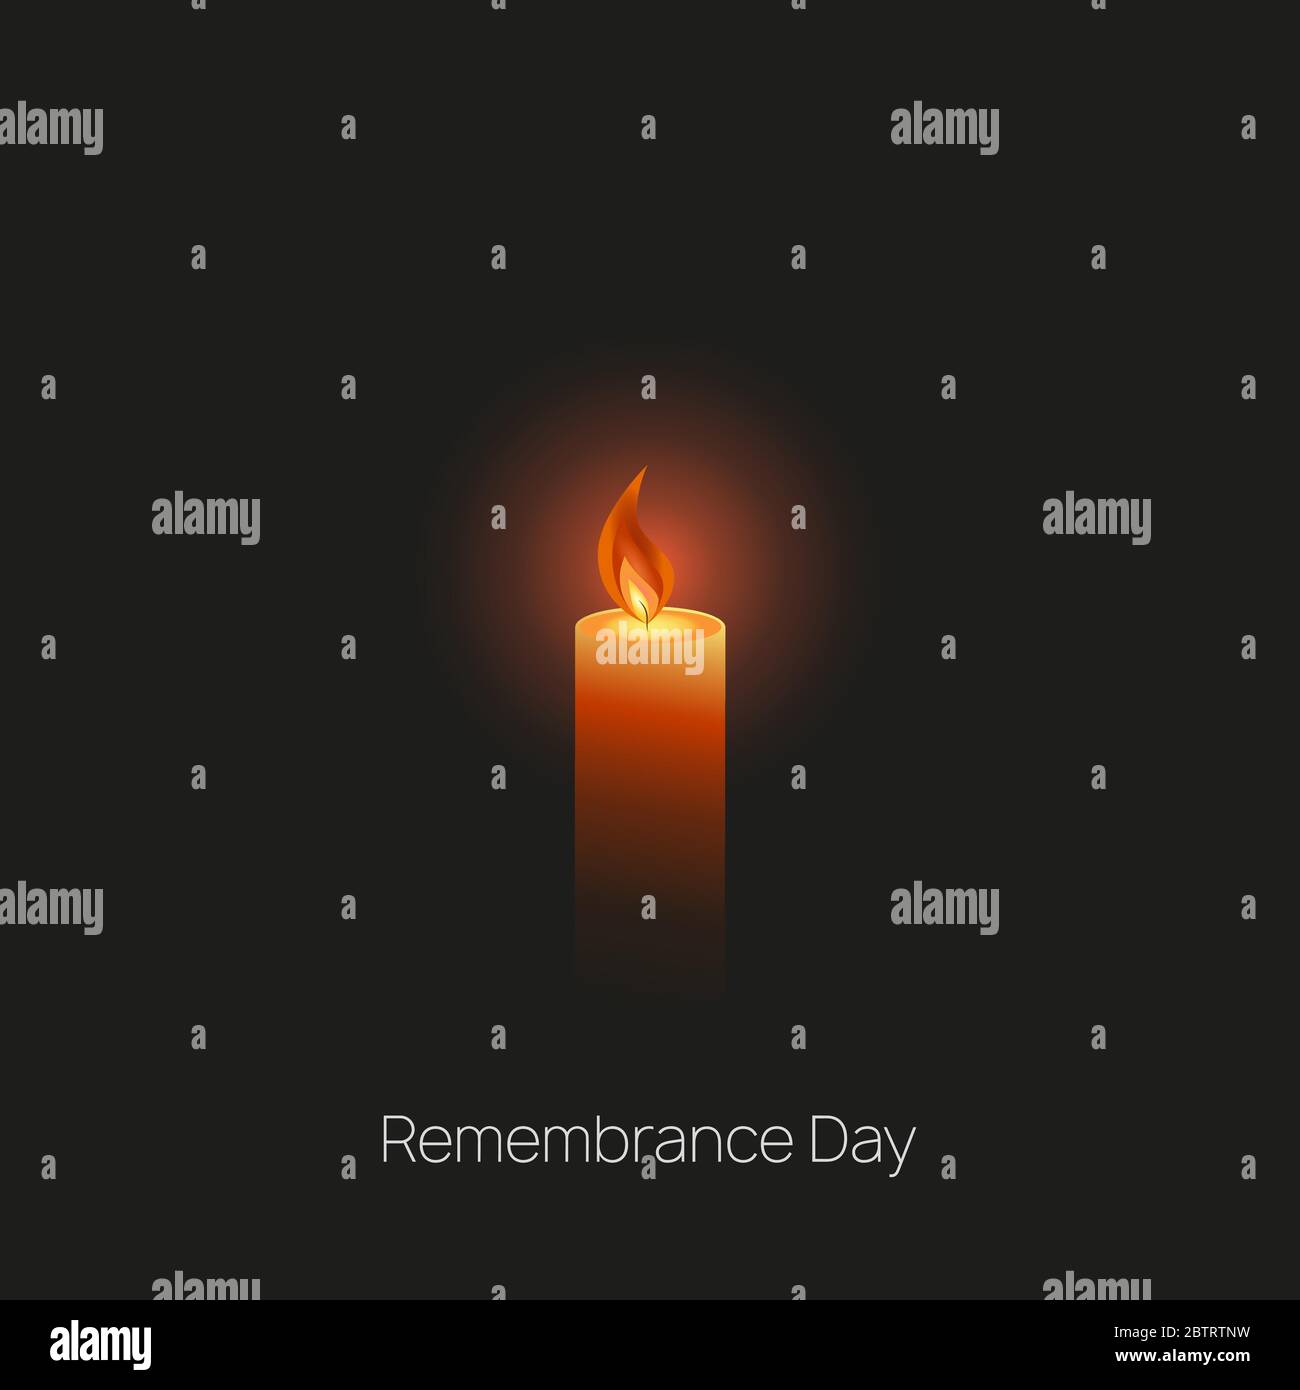 Memorial Day template. International Holocaust Remembrance Day with a Burning Candle on a Dark Background. Stock Vector